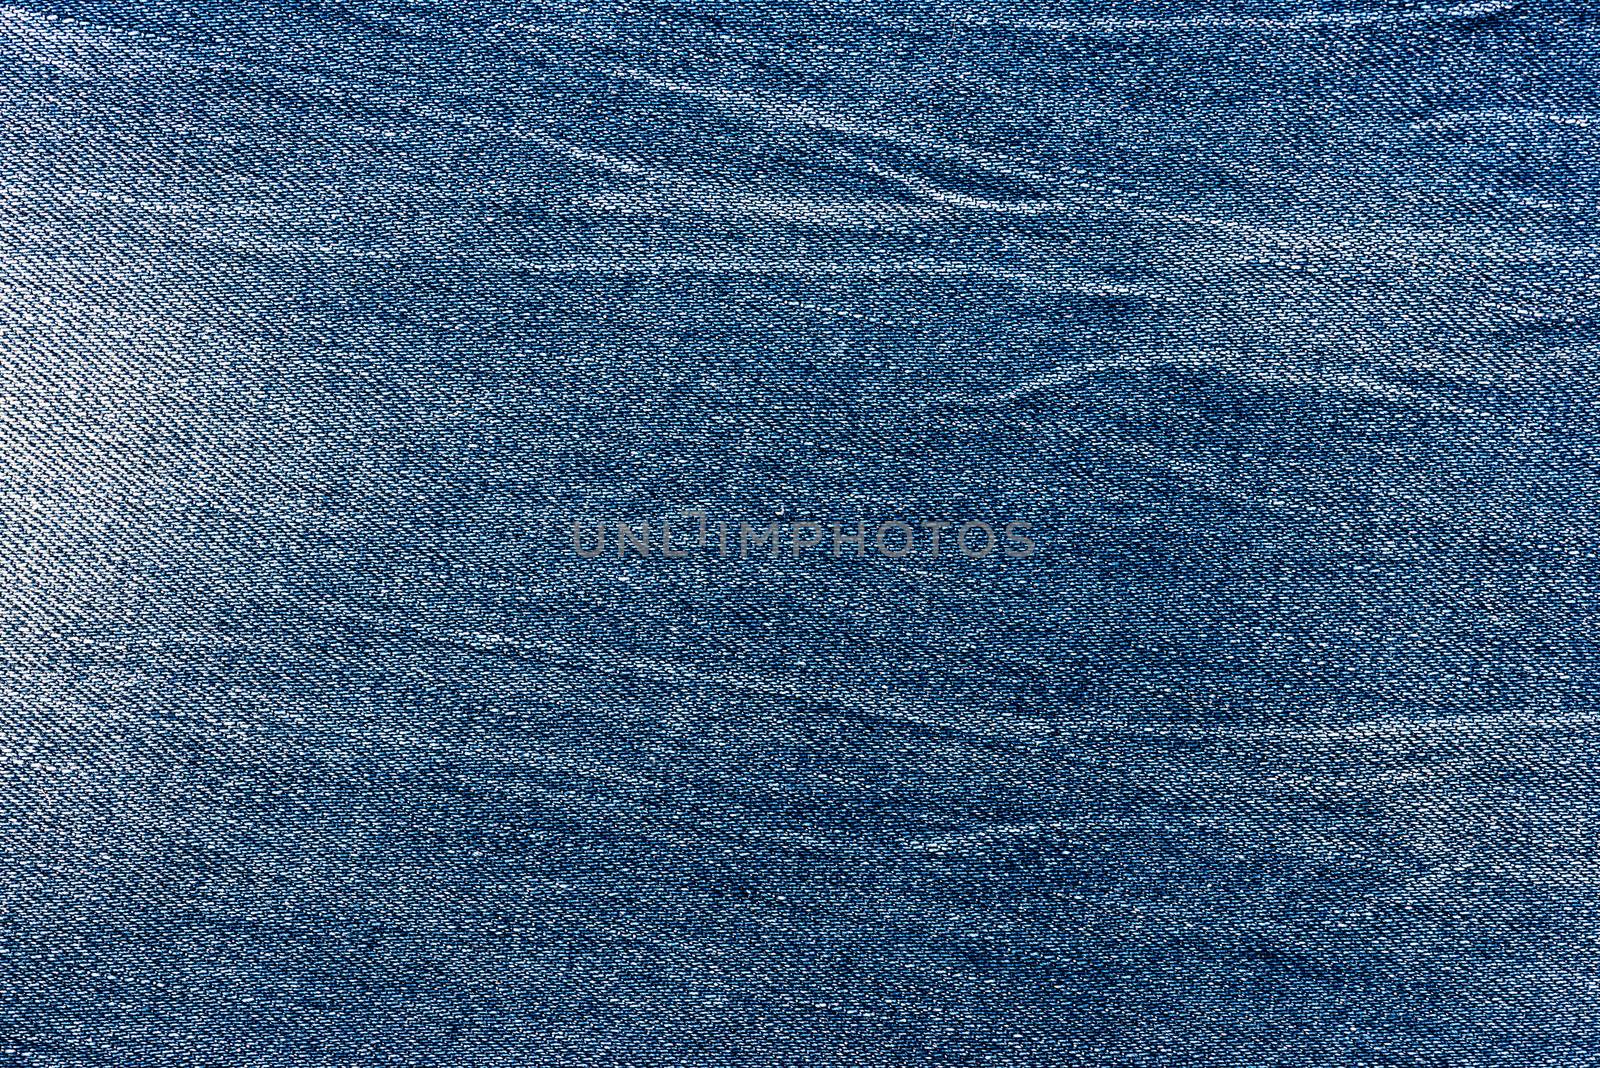 blue jeans texture for any background by DNKSTUDIO